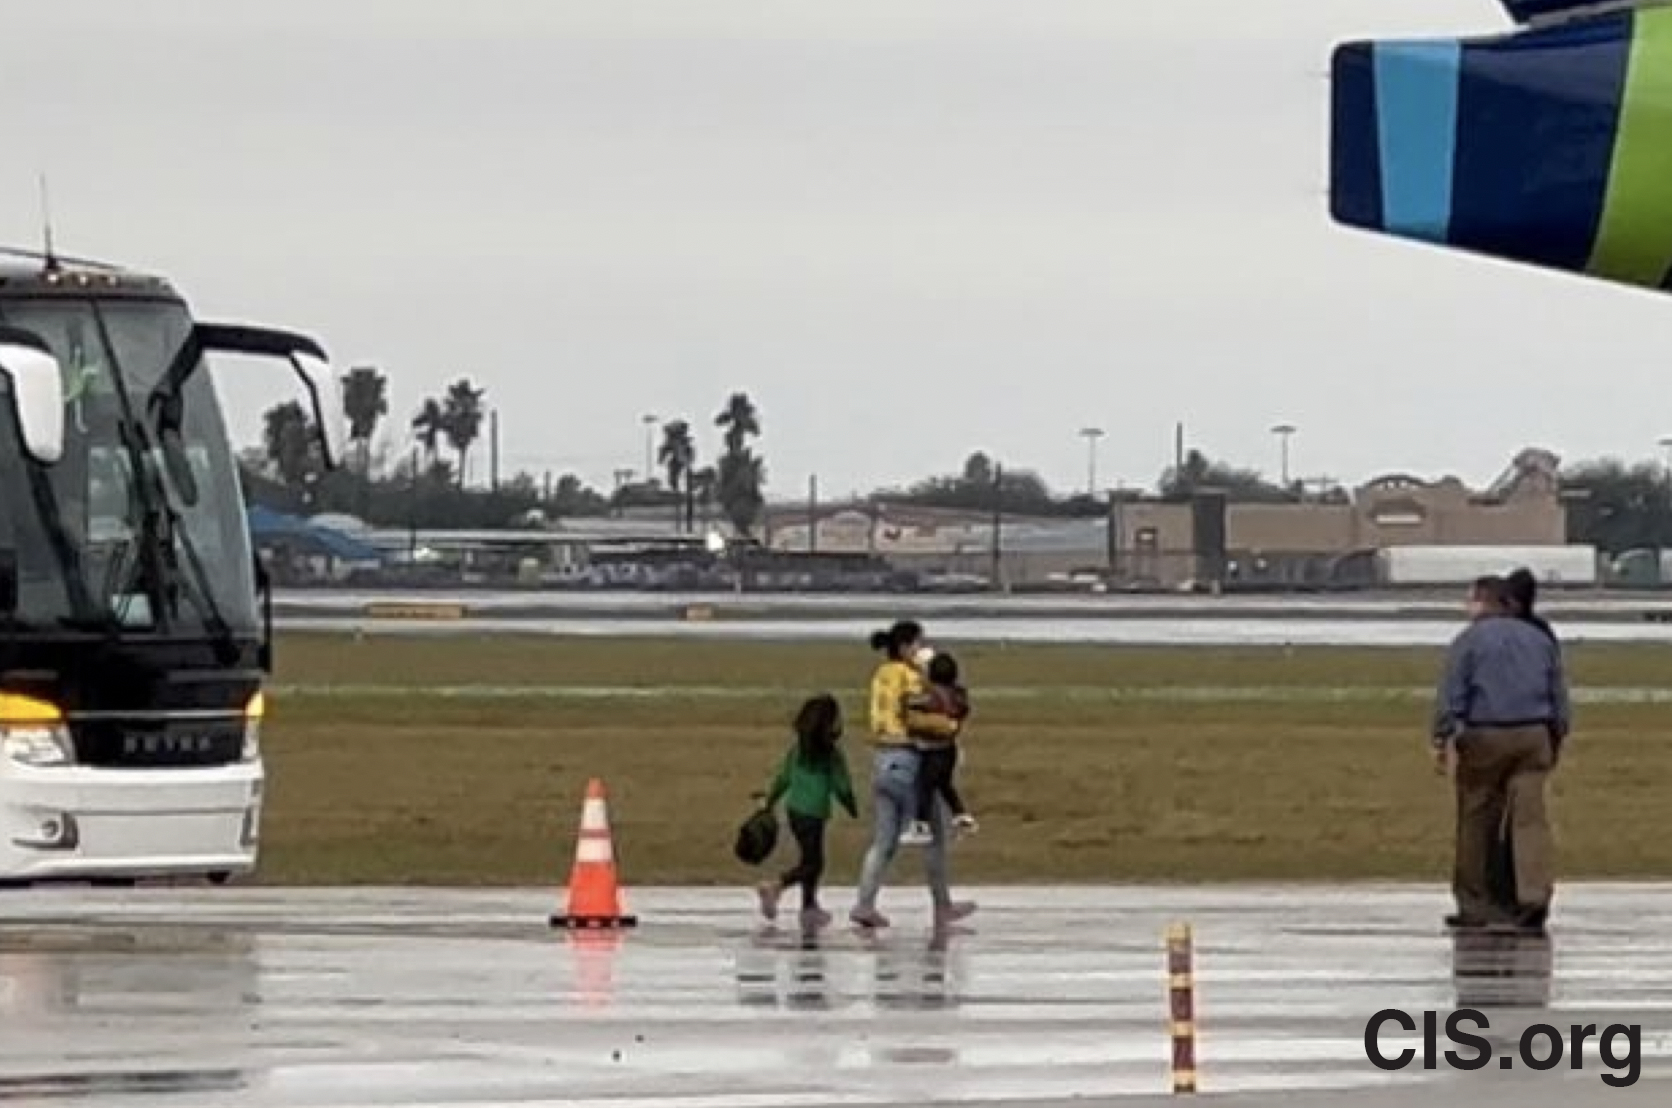 A migrant and two children disembark an ICE bus at the McAllen Texas airport to board a deportation flight to Guatemala City in November 2021